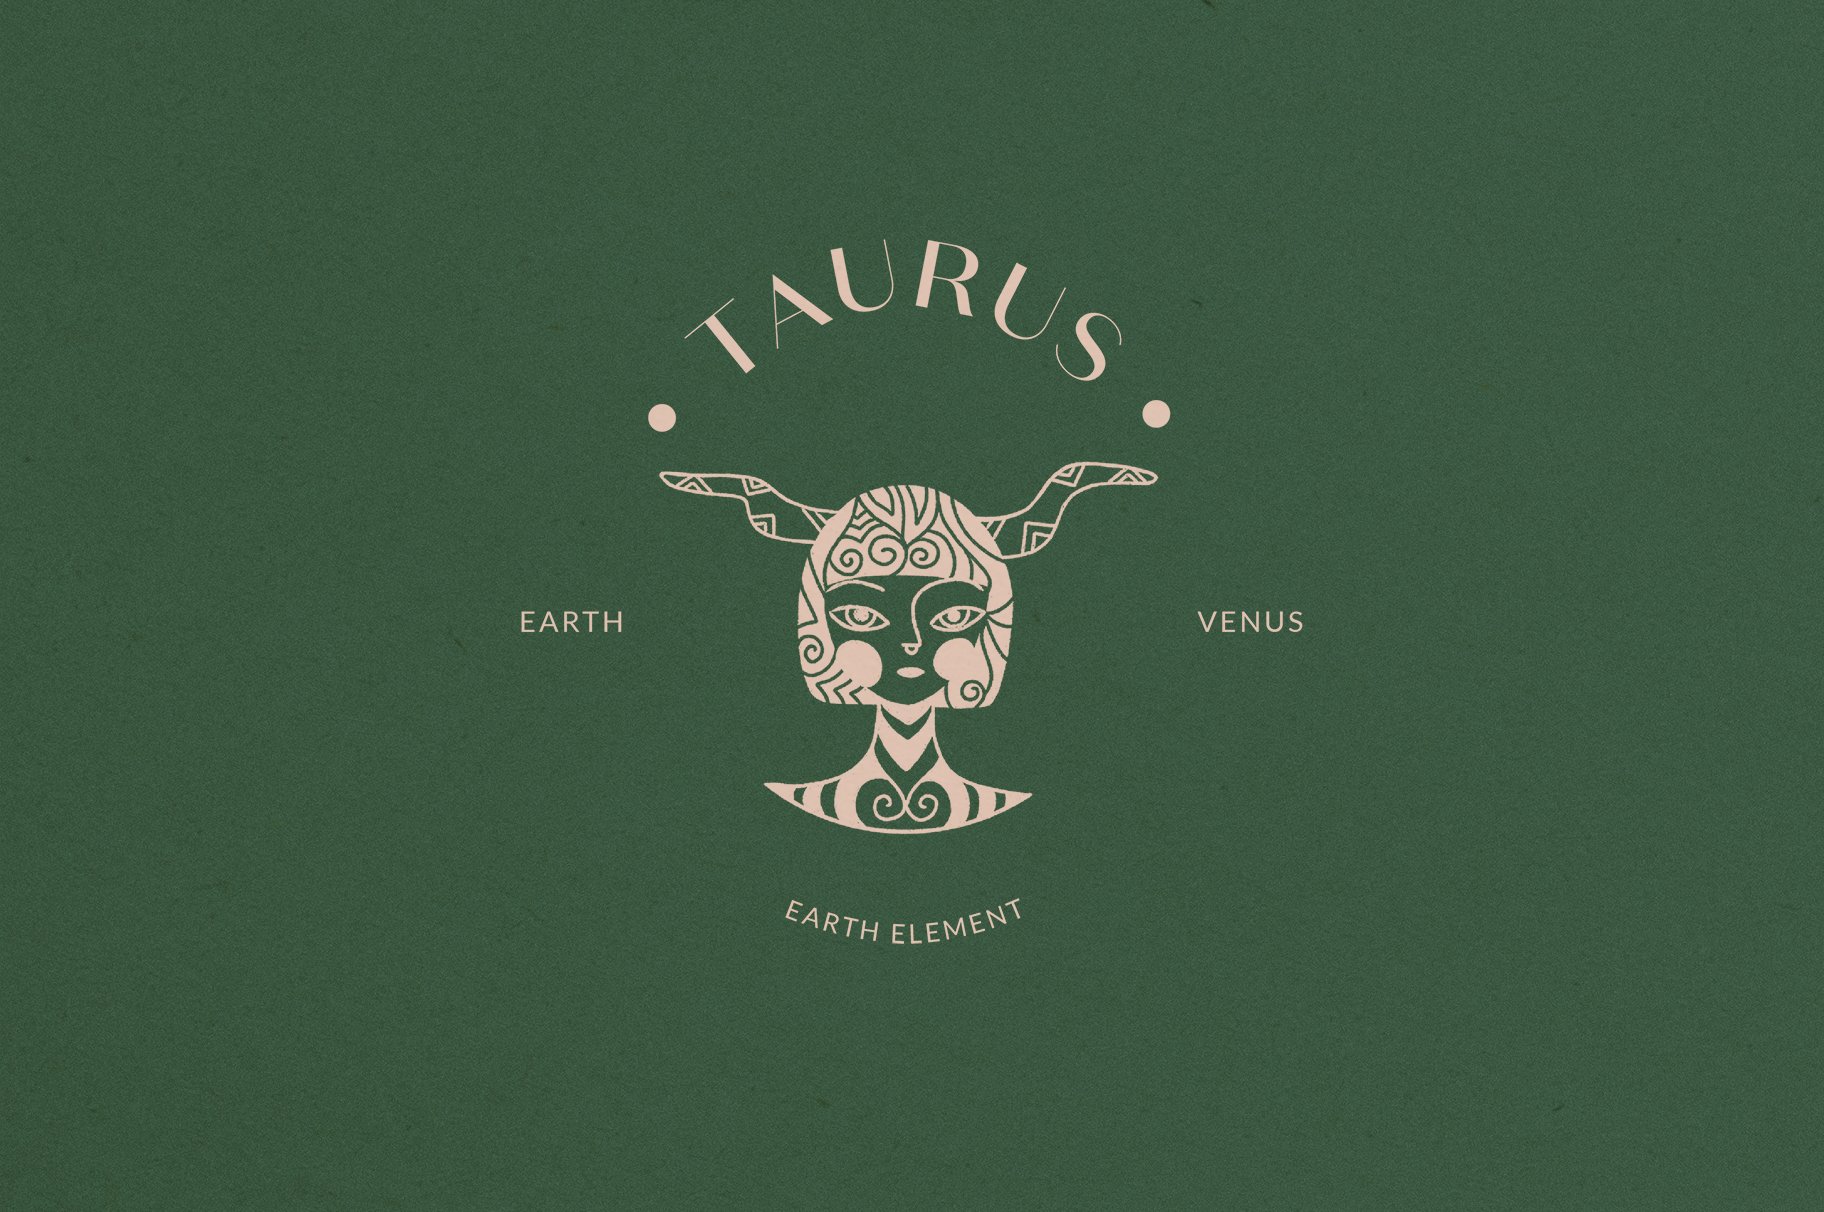 Green background with the taurus sign.